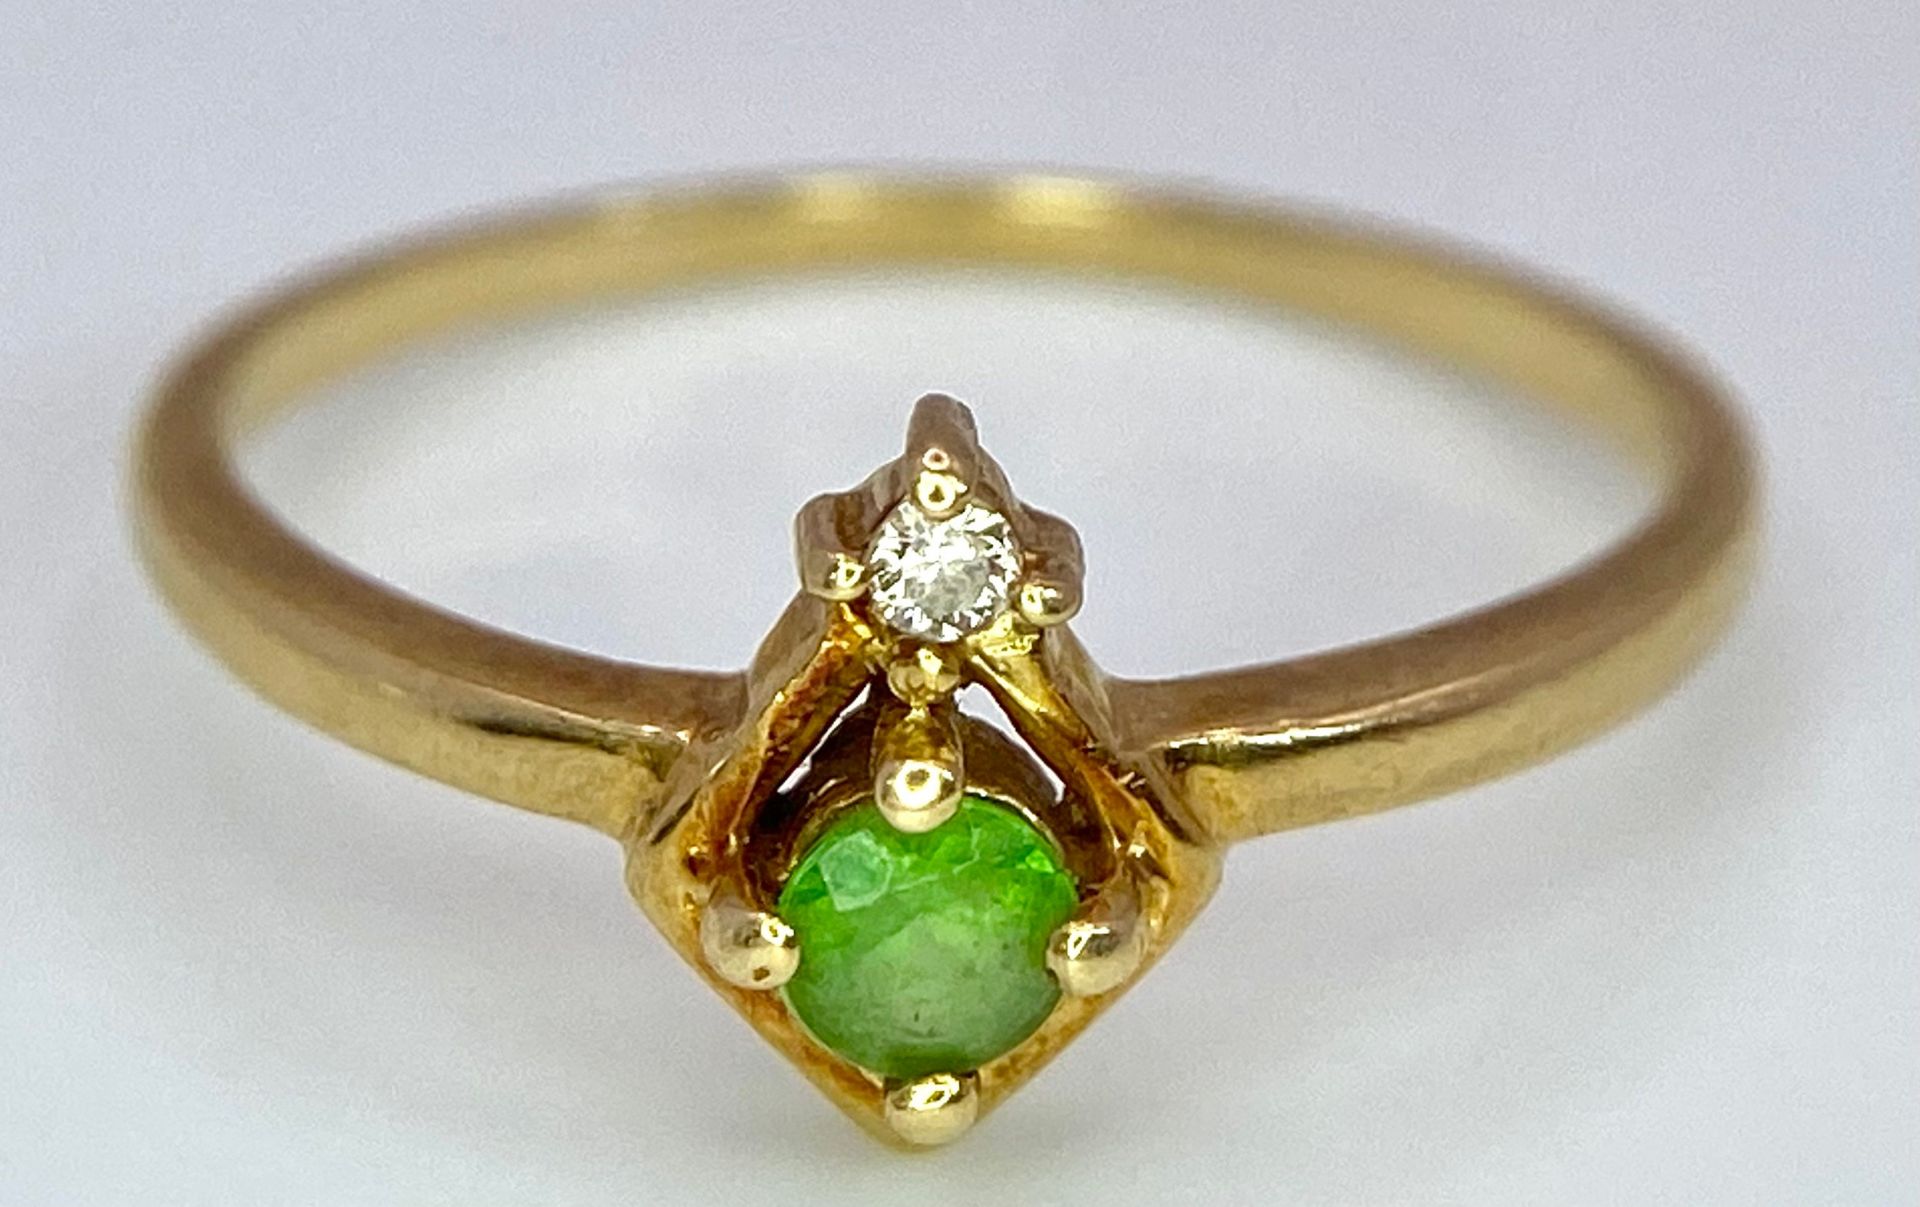 A14K YELLOW GOLD PERIDOT & DIAMOND RING. Size K/L, 1.4g total weight. Ref: SC 9030 - Image 4 of 6